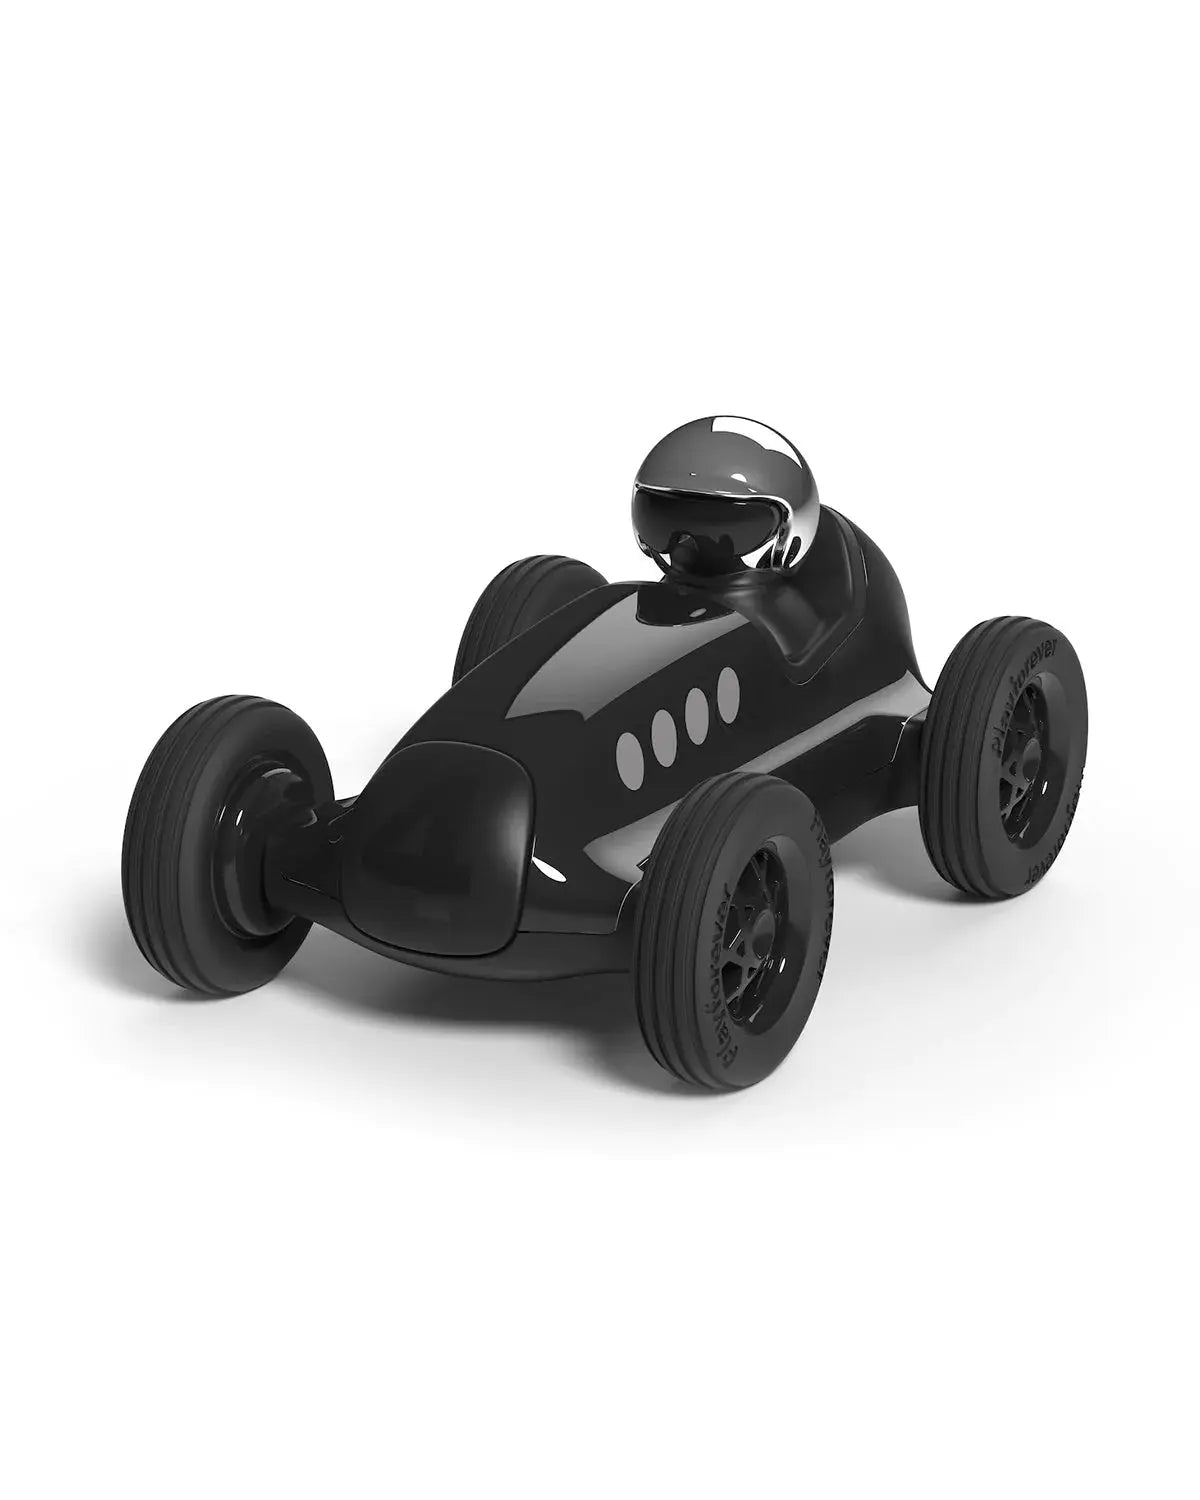 Dark Orange Car Verve Malibu, Wide Profile with Rubber Tyres Low-to-the-Ground, Stream-lined Toy Vehicle  Playforever Verona Black  